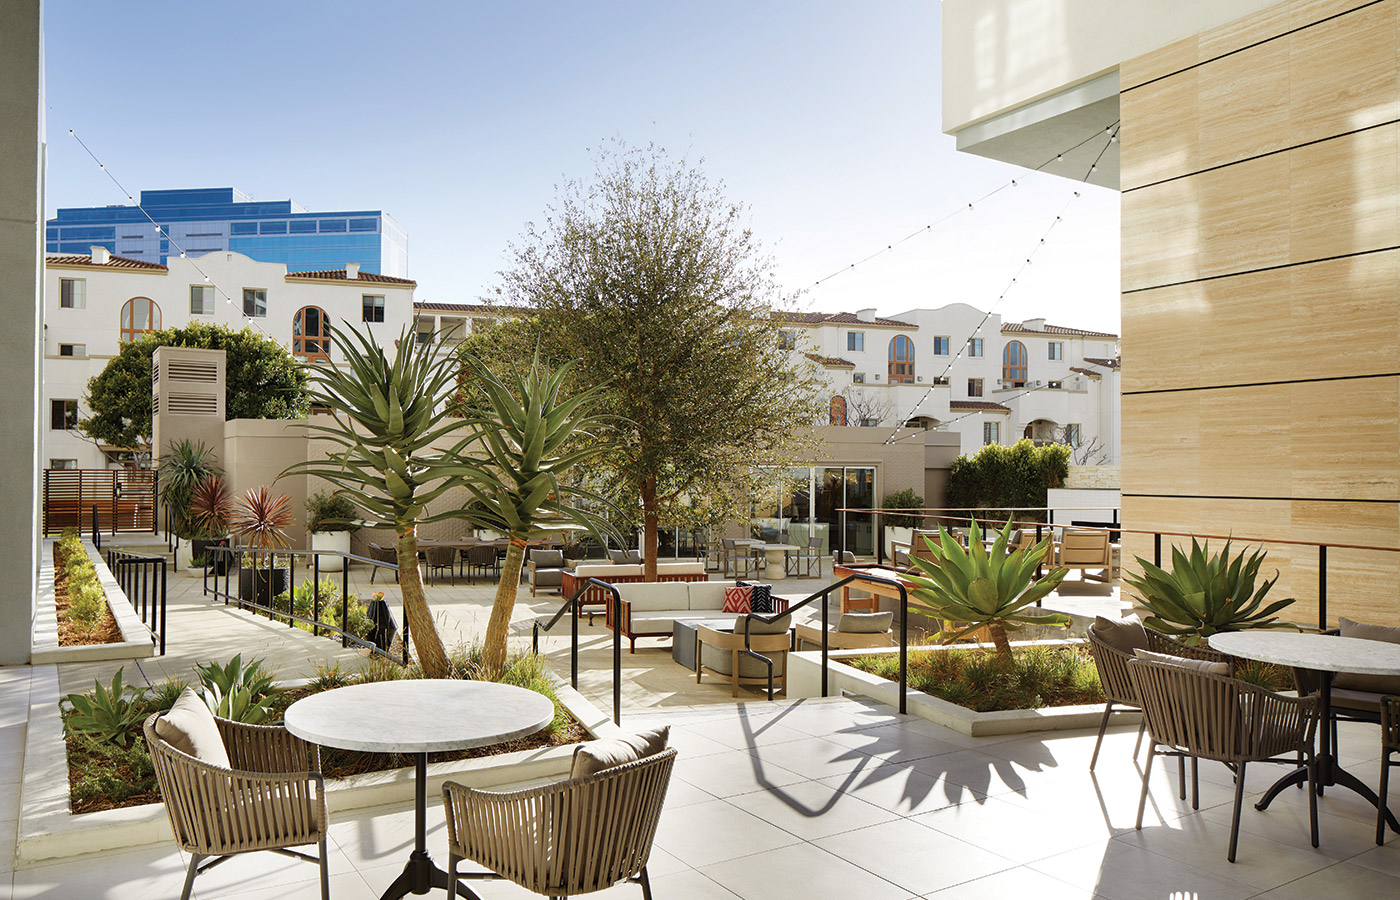 The courtyard at The Watermark at Westwood Village.